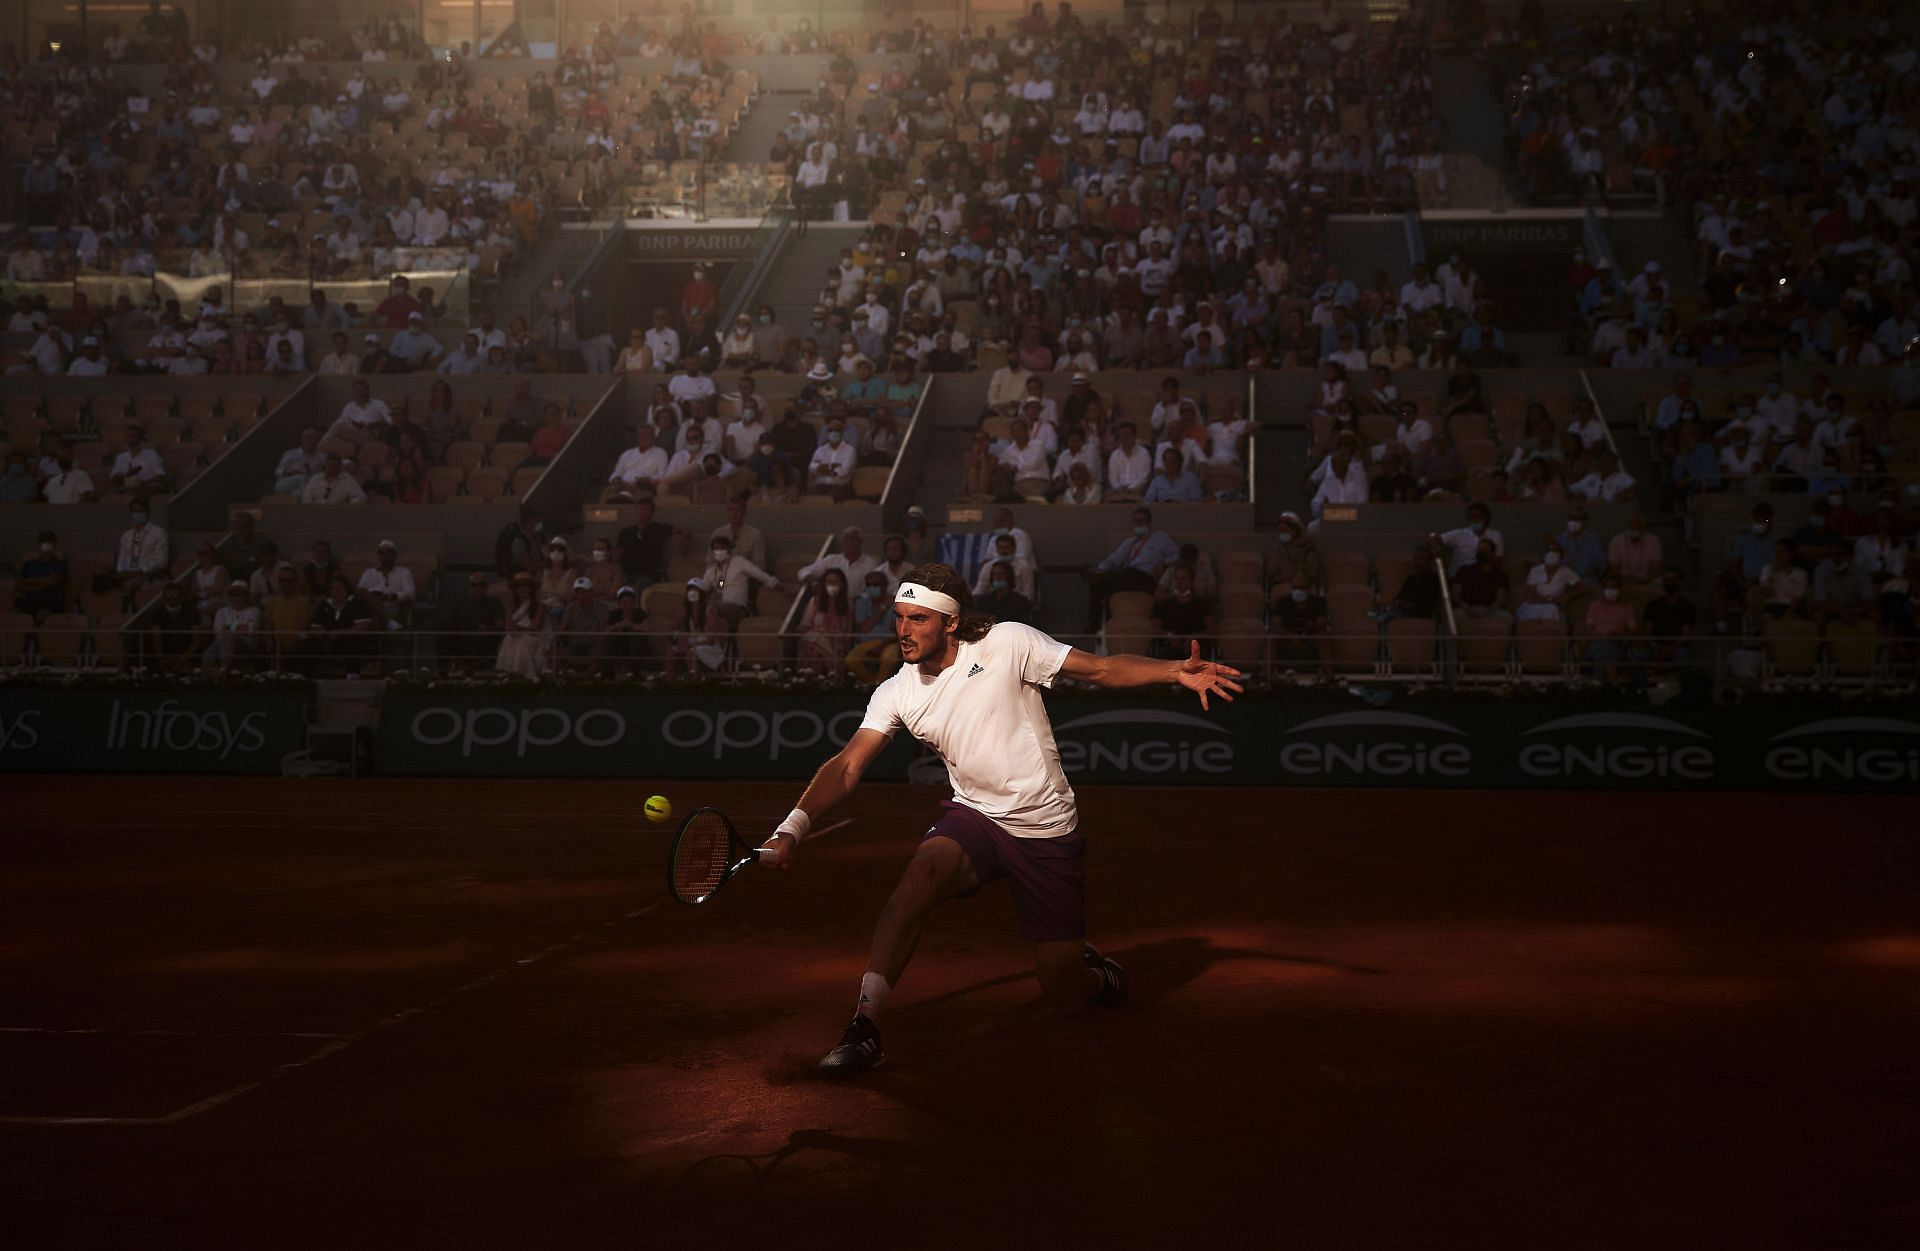 Stefanos Tsitsipas at the 2021 French Open